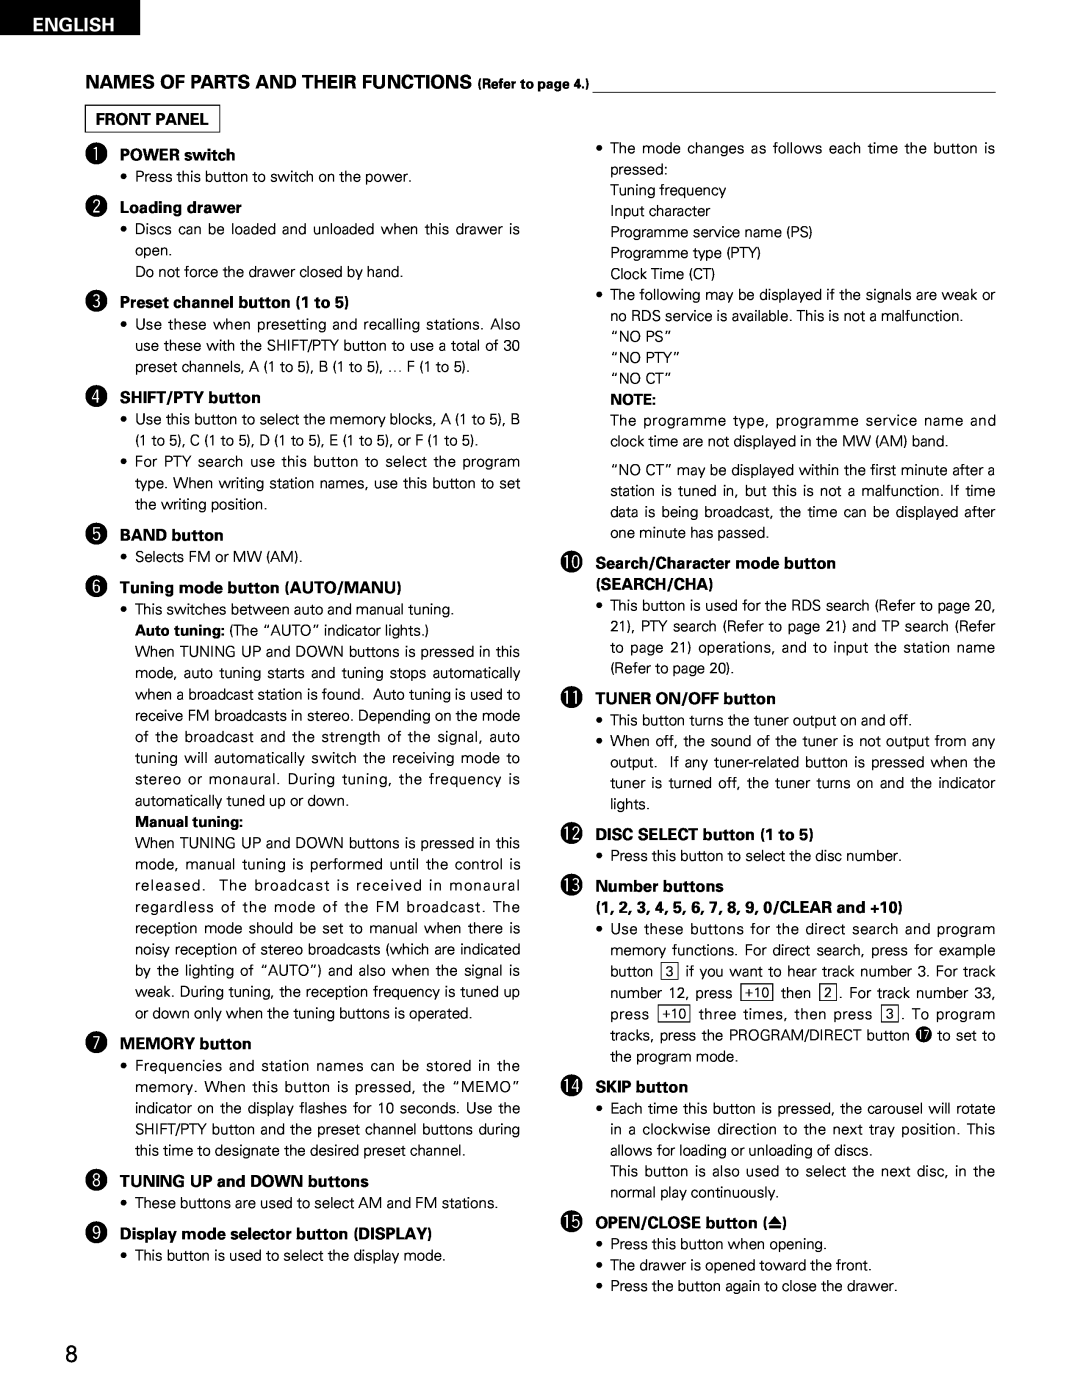 Denon DN-H800 operating instructions NAMES OF PARTS AND THEIR FUNCTIONS Refer to page, English 